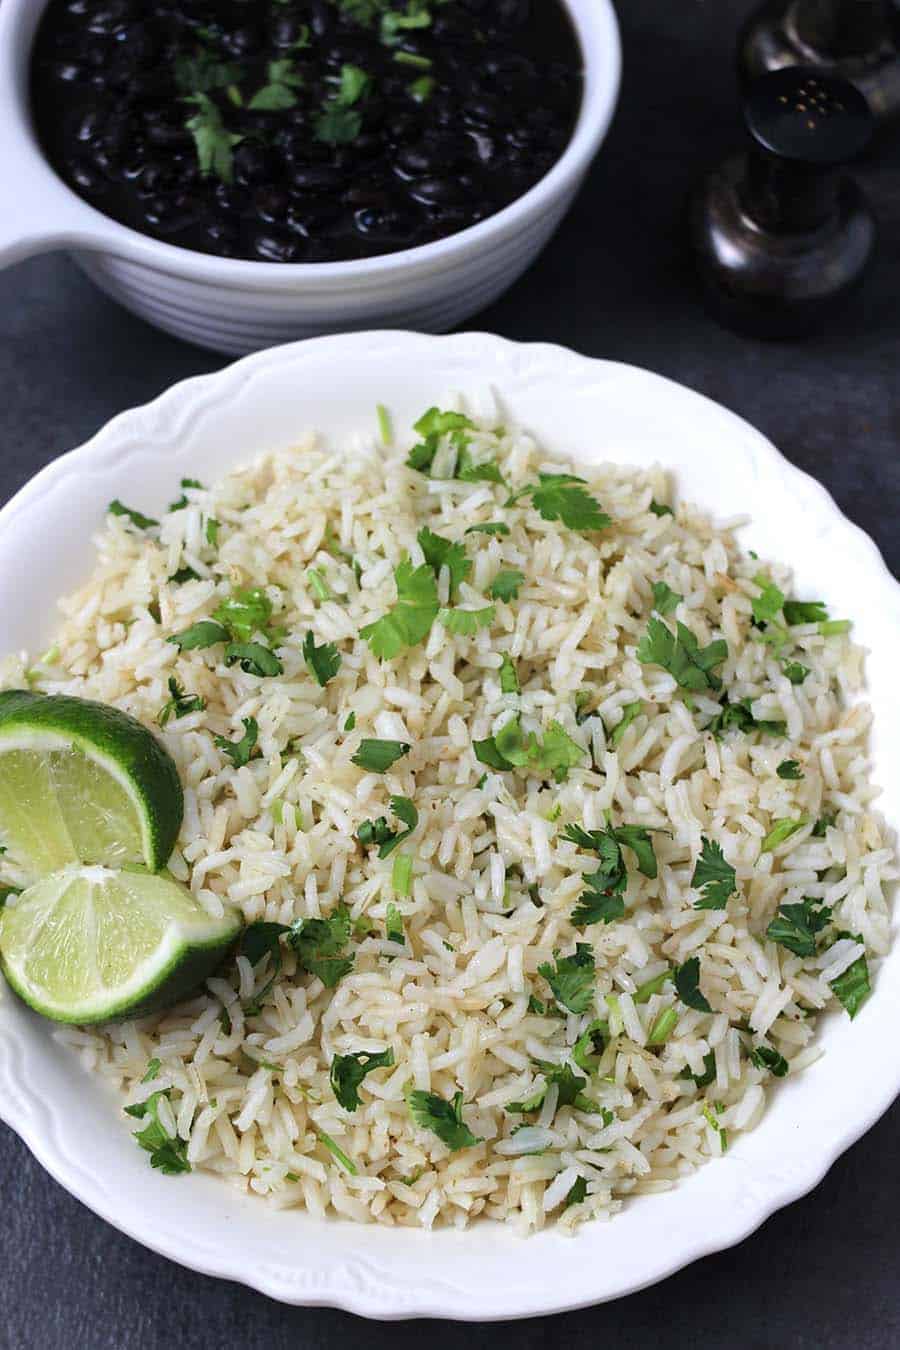 Cilantro Lime Rice, Authentic perfect Mexican Rice, Instant pot mexican rice recipes, mexican rice chickenbowls recipes, mexican jasmine rice, how to make restaurant style mexican rice, copycat Chipotle style recipes 